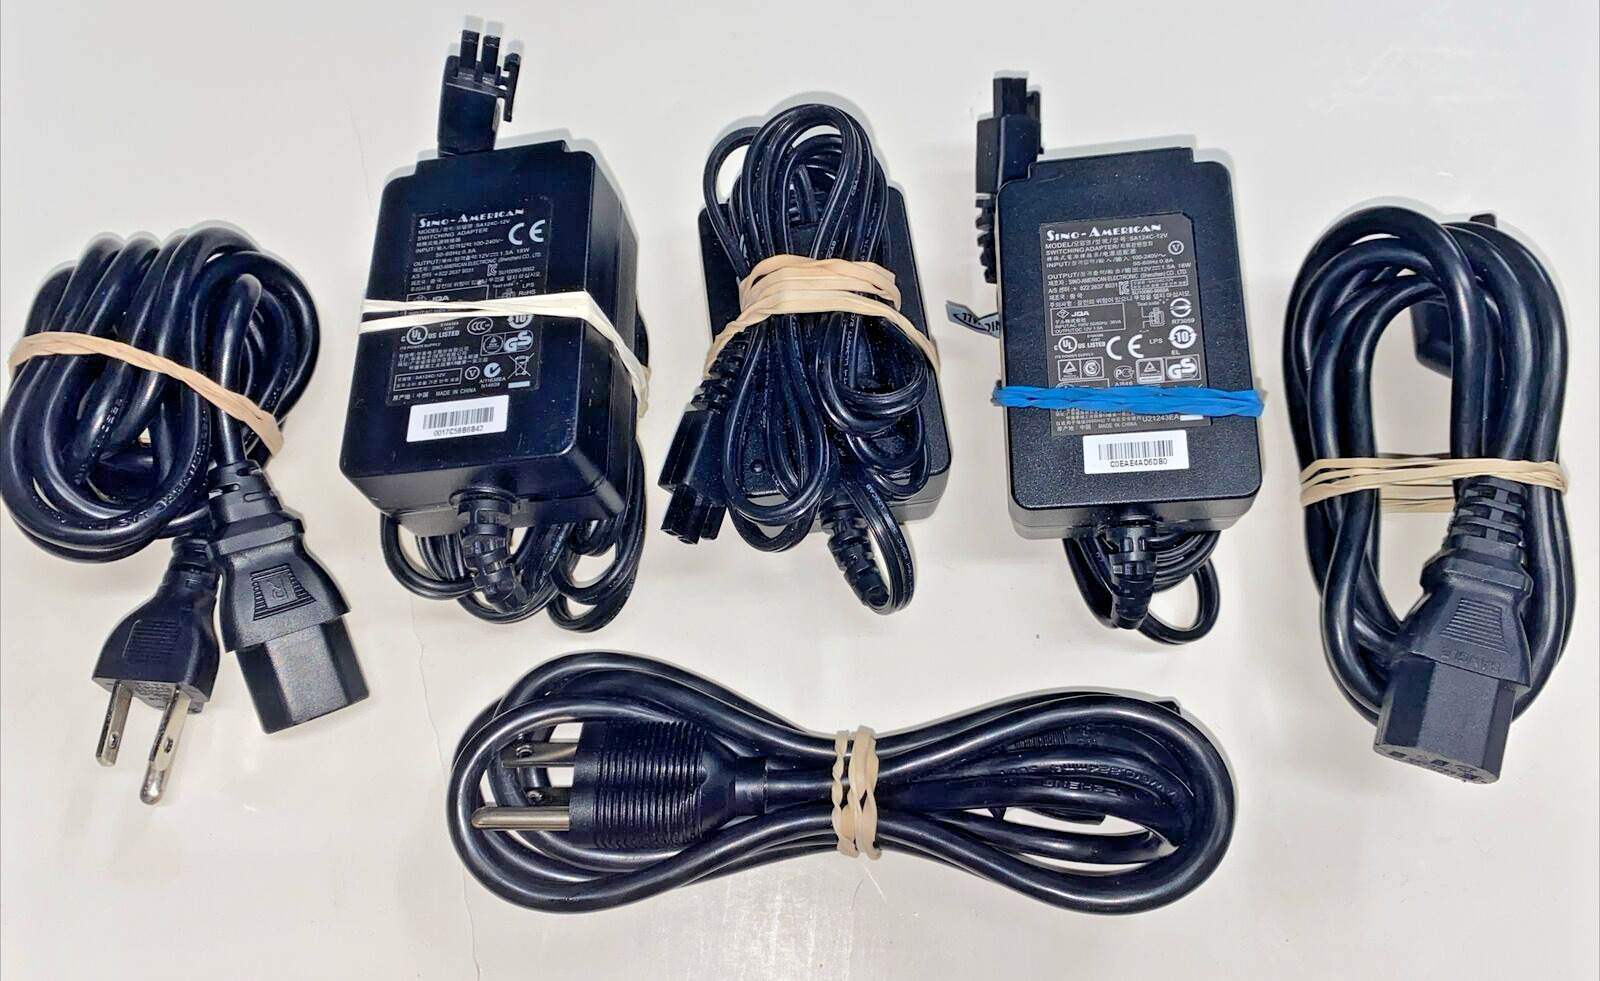 Lot of 3 Sino-American 18W SA120A-1217V-C 12V Switching Adapters + 3 Power Cords